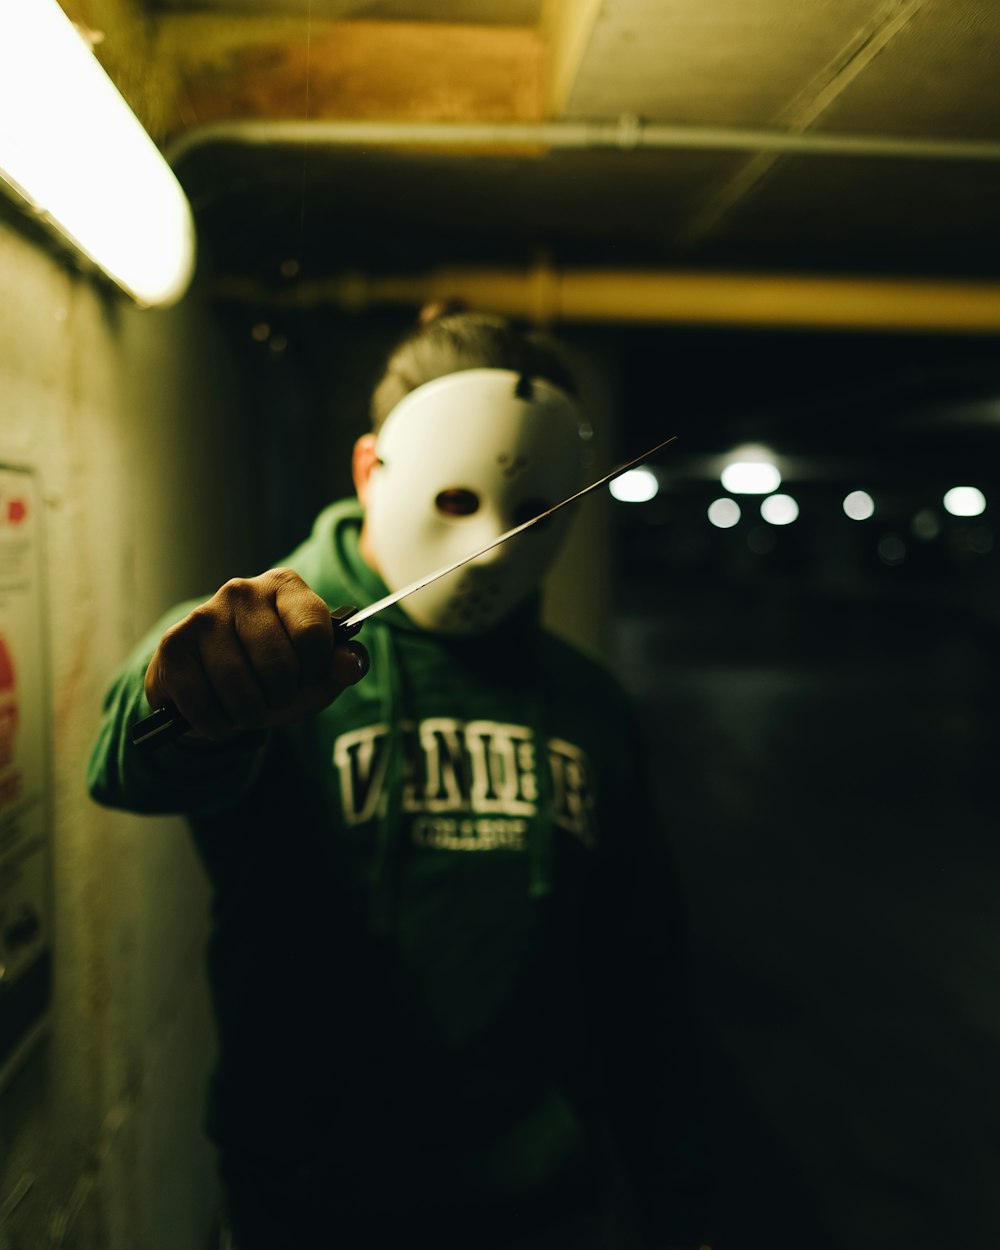 a person wearing a mask and holding a knife